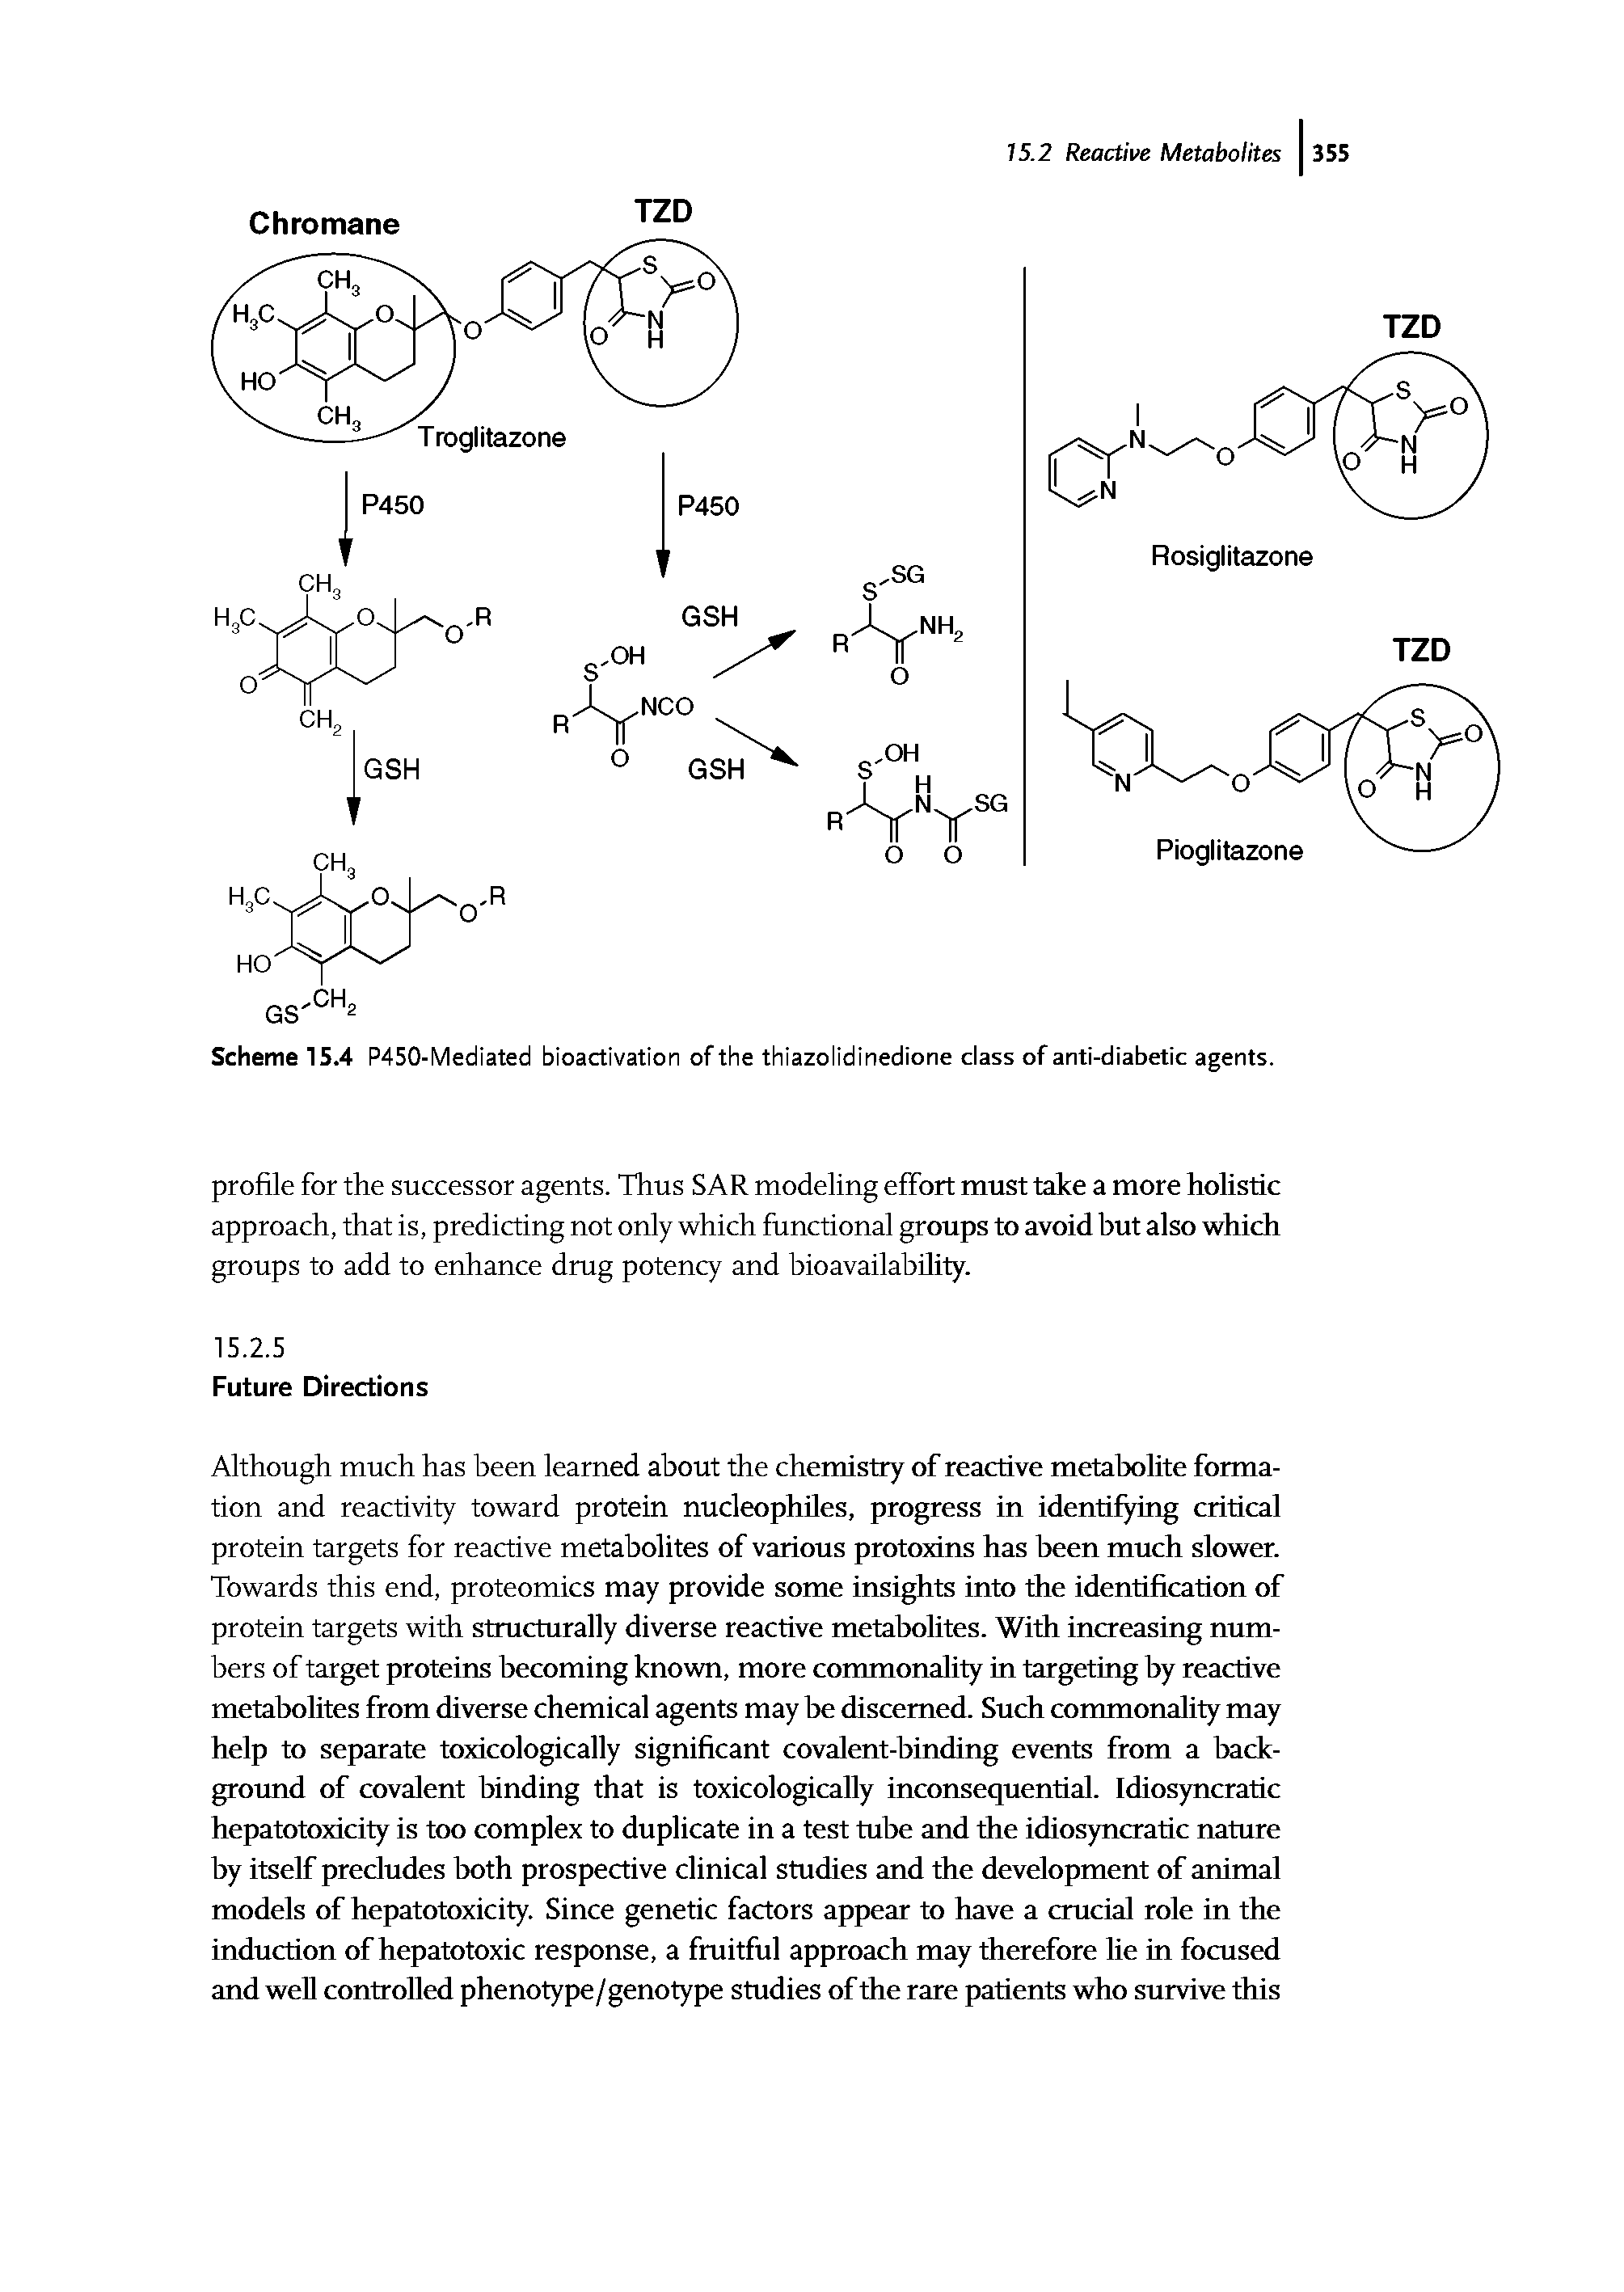 Scheme 15.4 P450-Mediated bioactivation of the thiazolidinedione class of anti-diabetic agents.